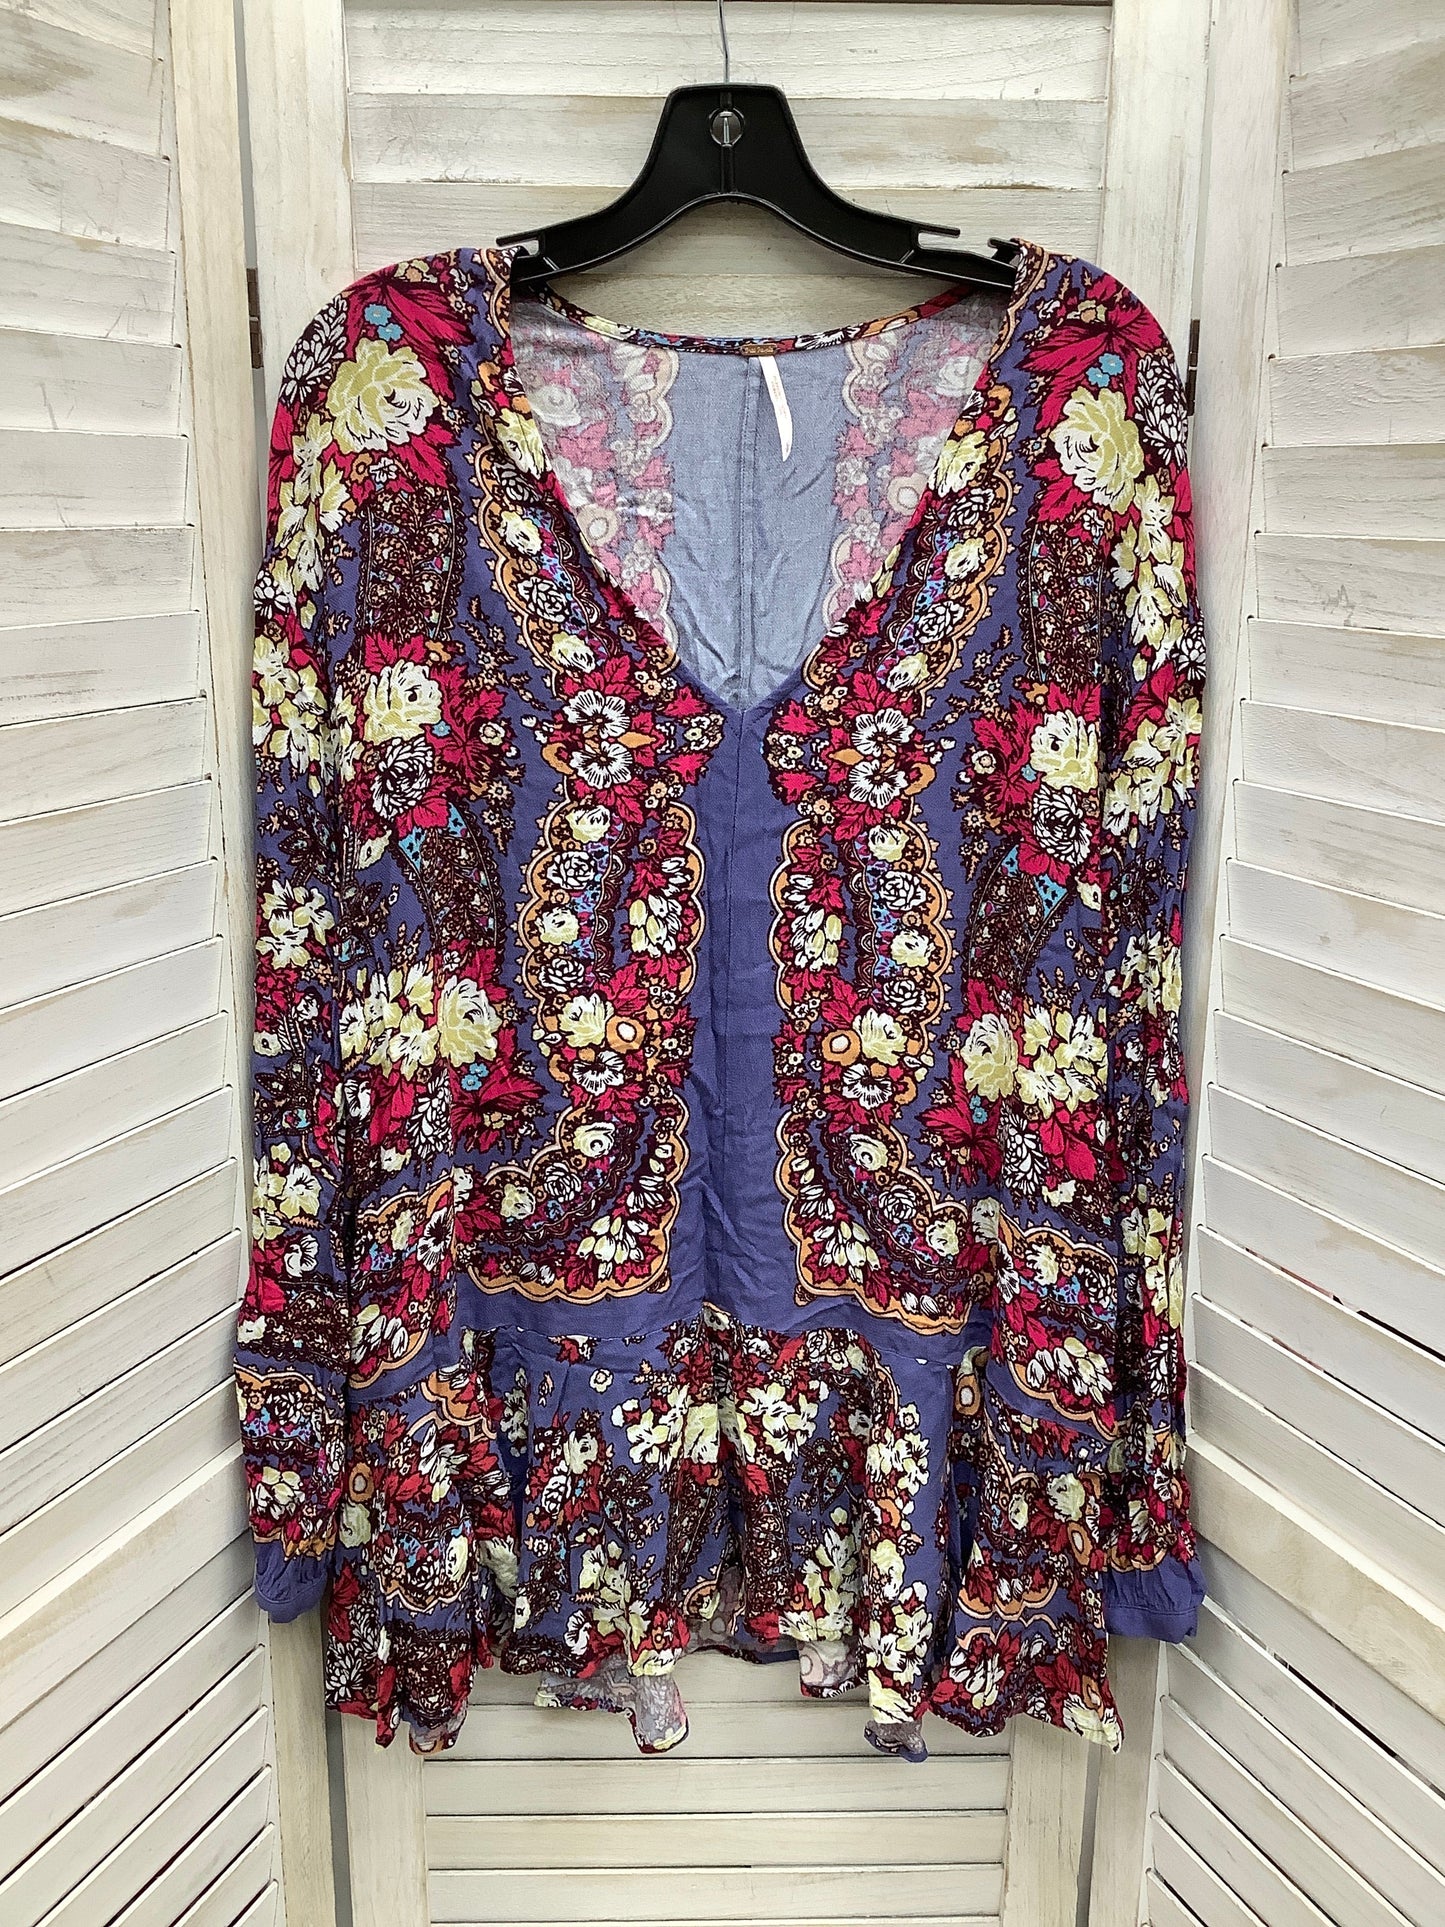 Floral Print Tunic 3/4 Sleeve Free People, Size L